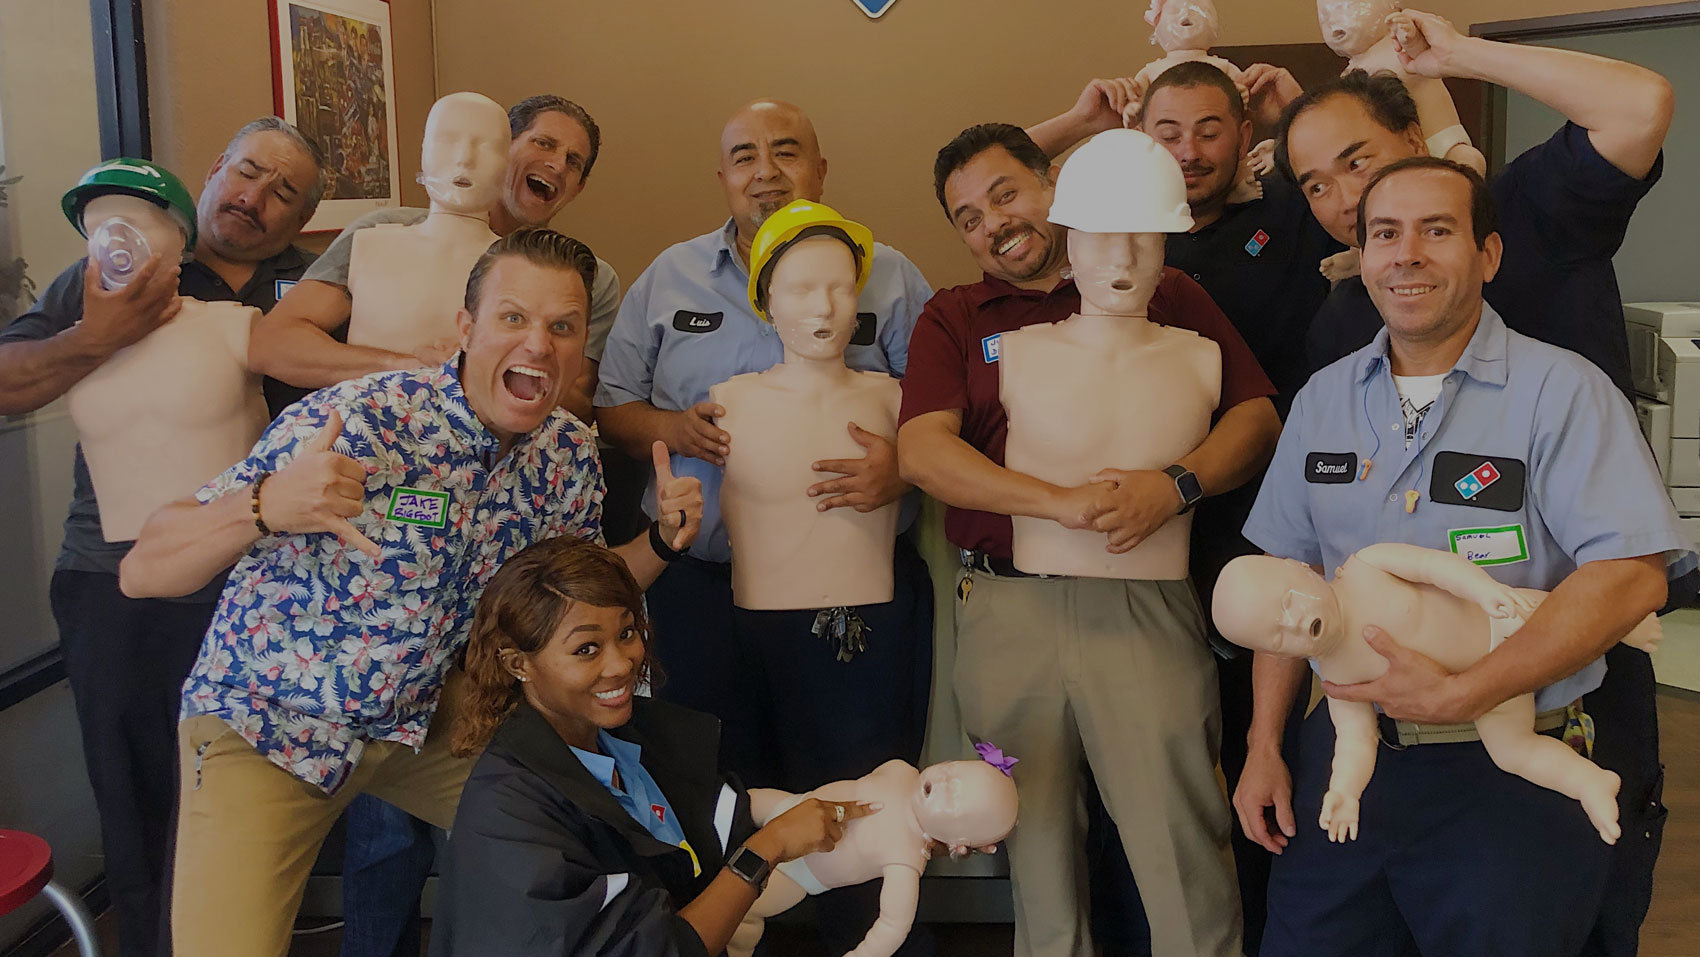 CPR & FIRST AID TRAINING